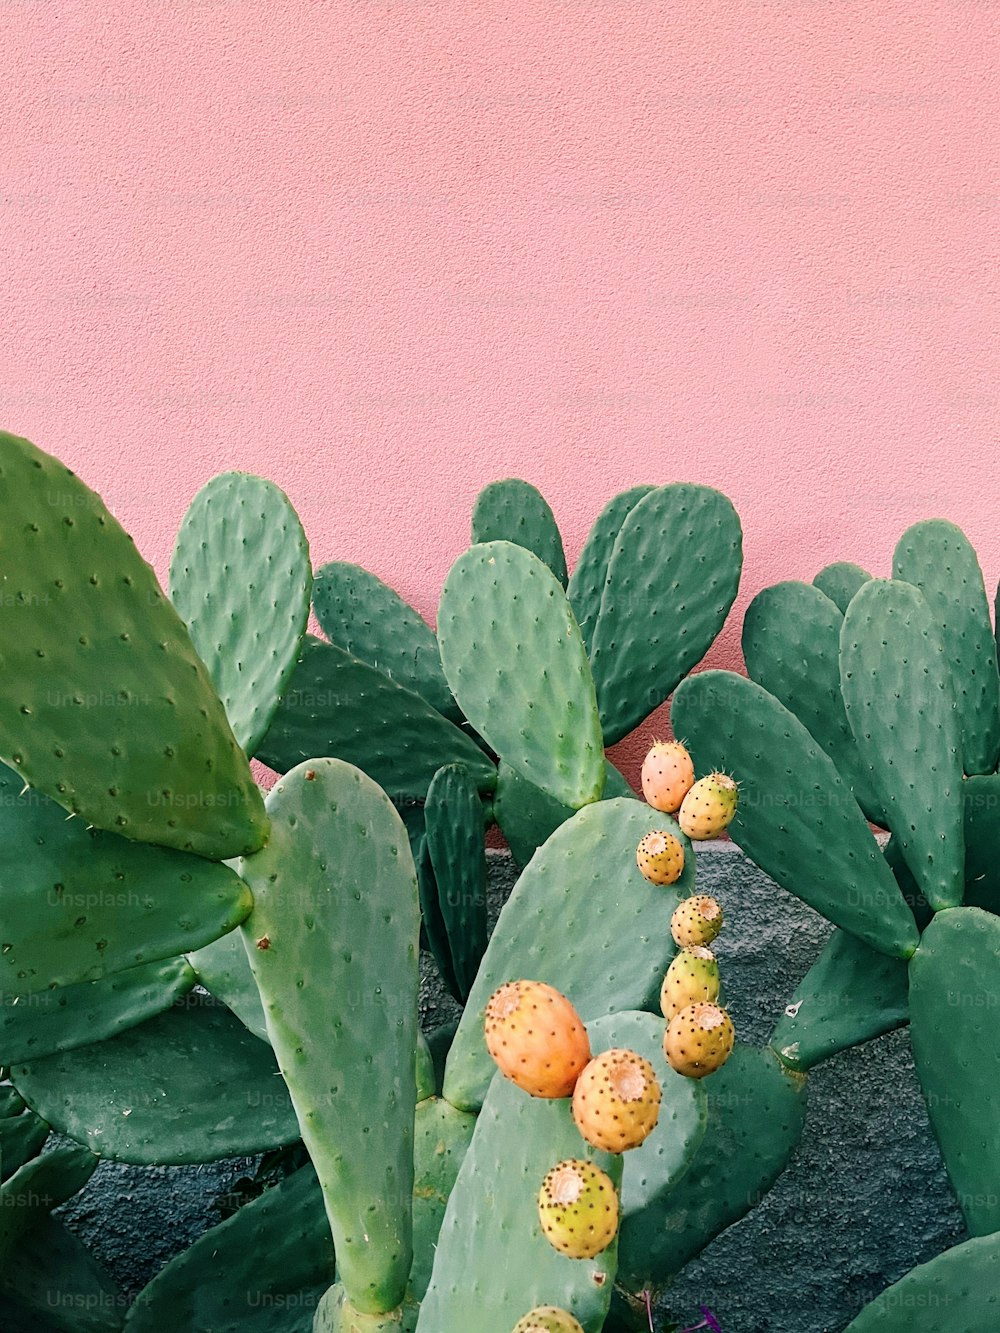 a group of cactus plants next to a pink wall